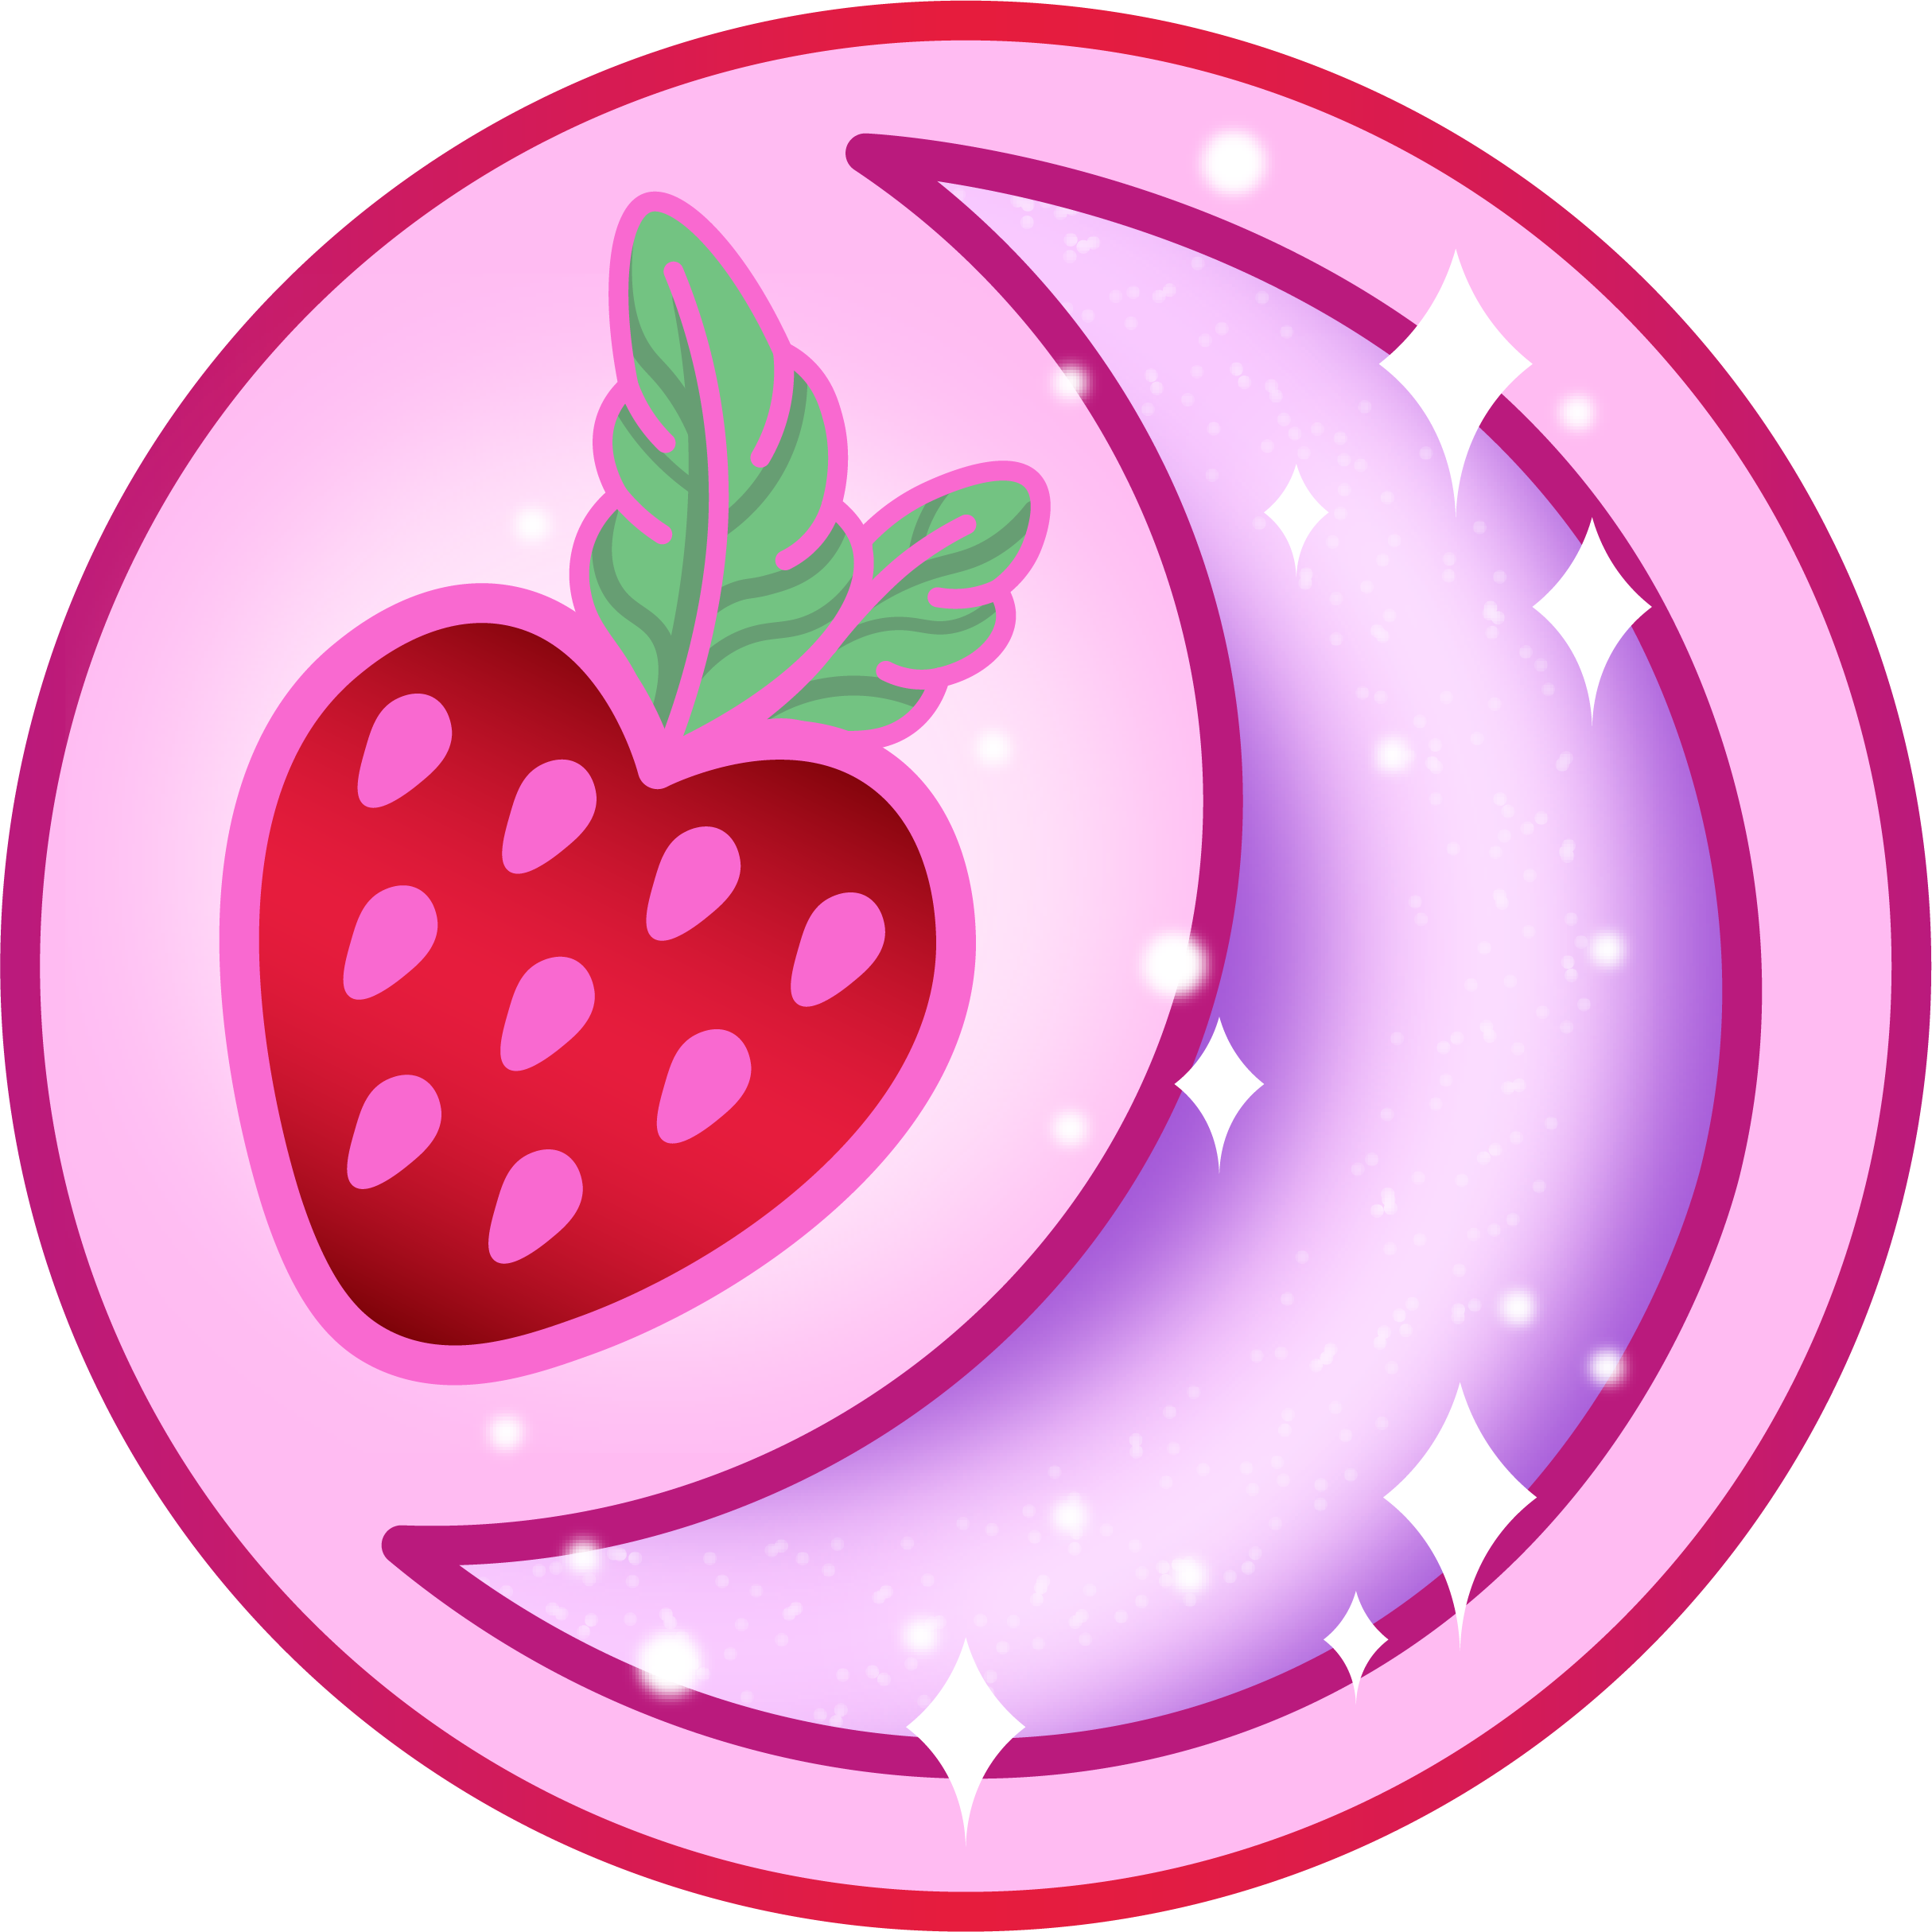 Adorable 12-Year-Old Girl Anime Character as Strawberry | AI Art Generator  | Easy-Peasy.AI